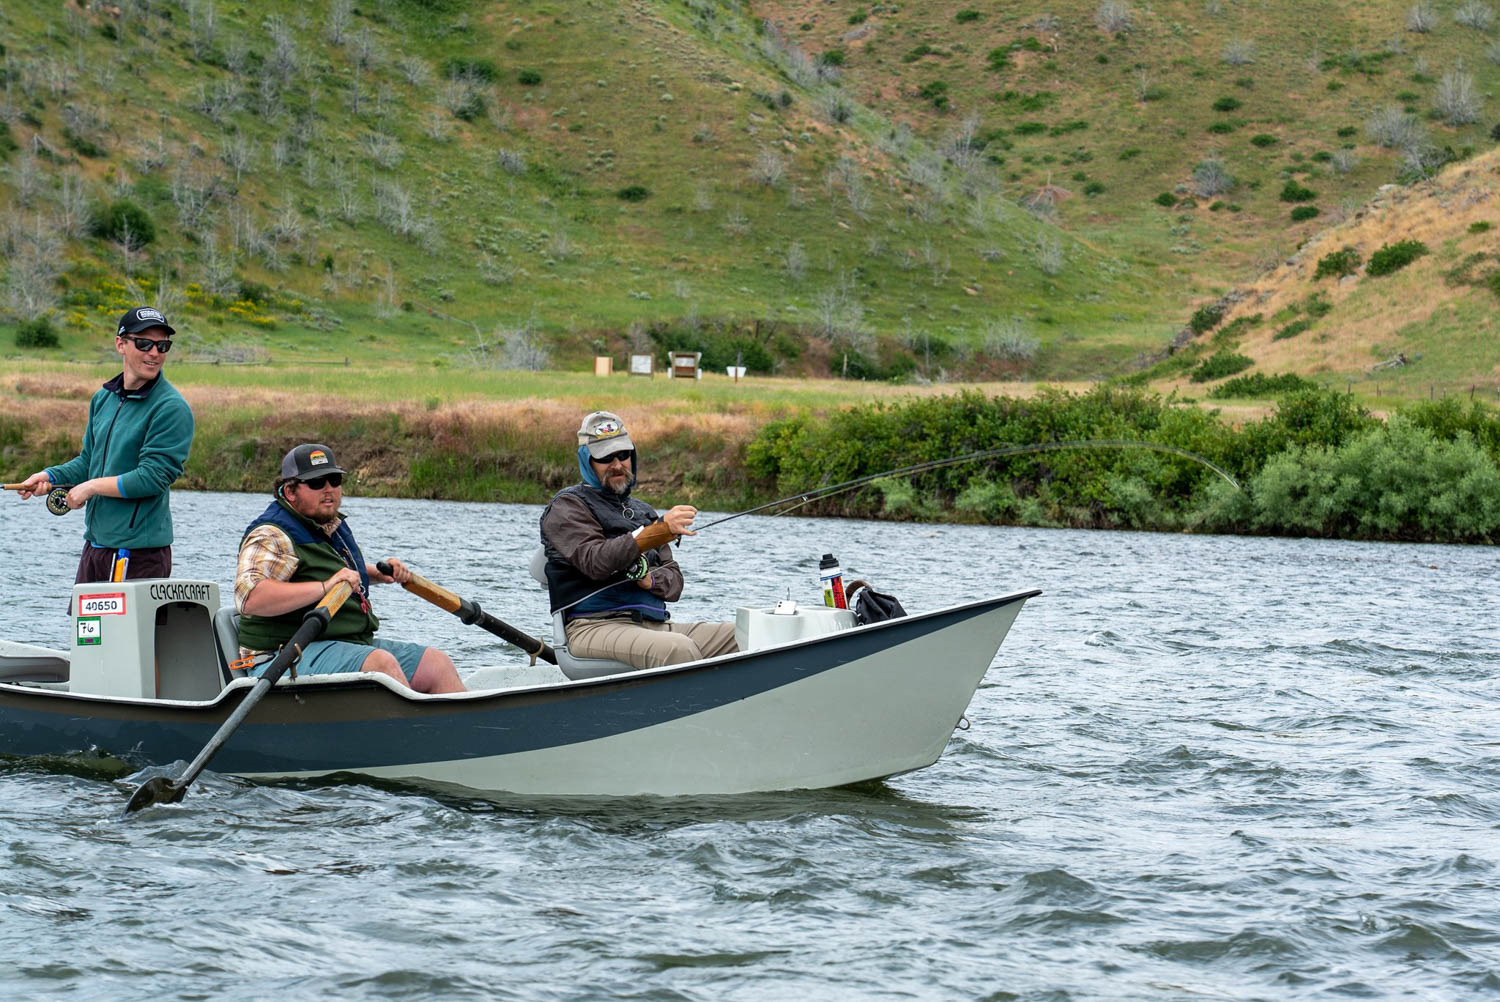 FLY FISHING – A UNIQUE ADVENTURE FOR ALL | Challenged Athletes Foundation